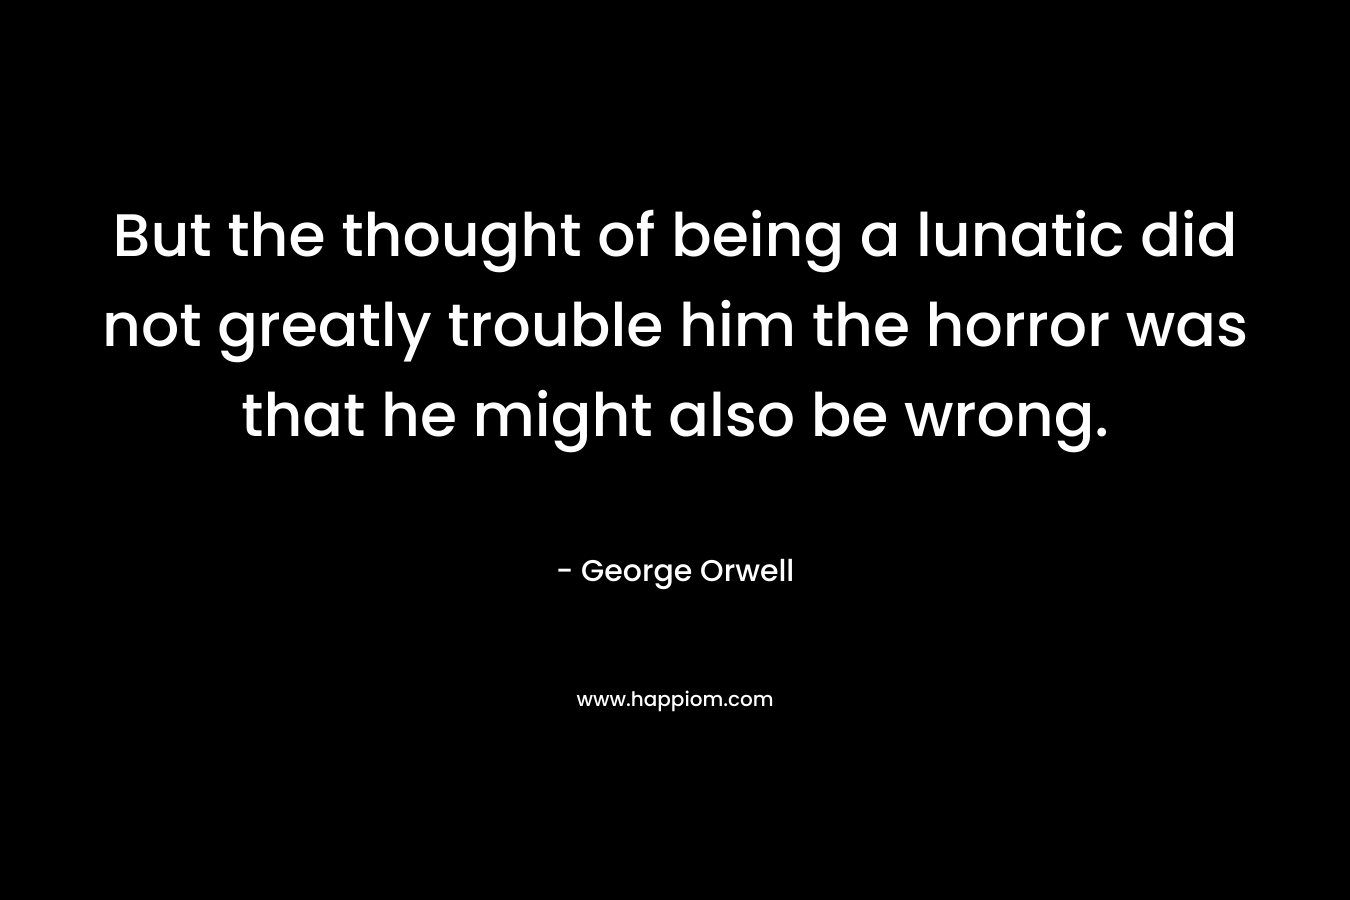 But the thought of being a lunatic did not greatly trouble him the horror was that he might also be wrong.  